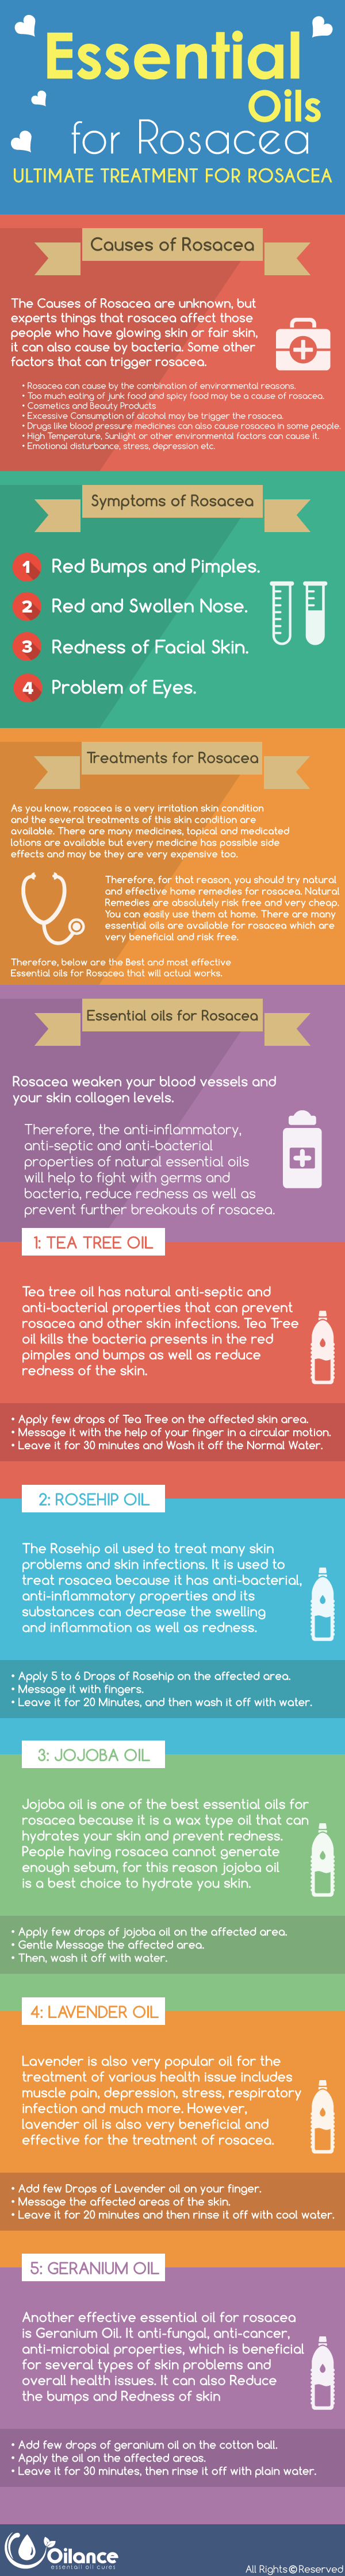 Best Essential Oils For Treating Rosacea Infographic